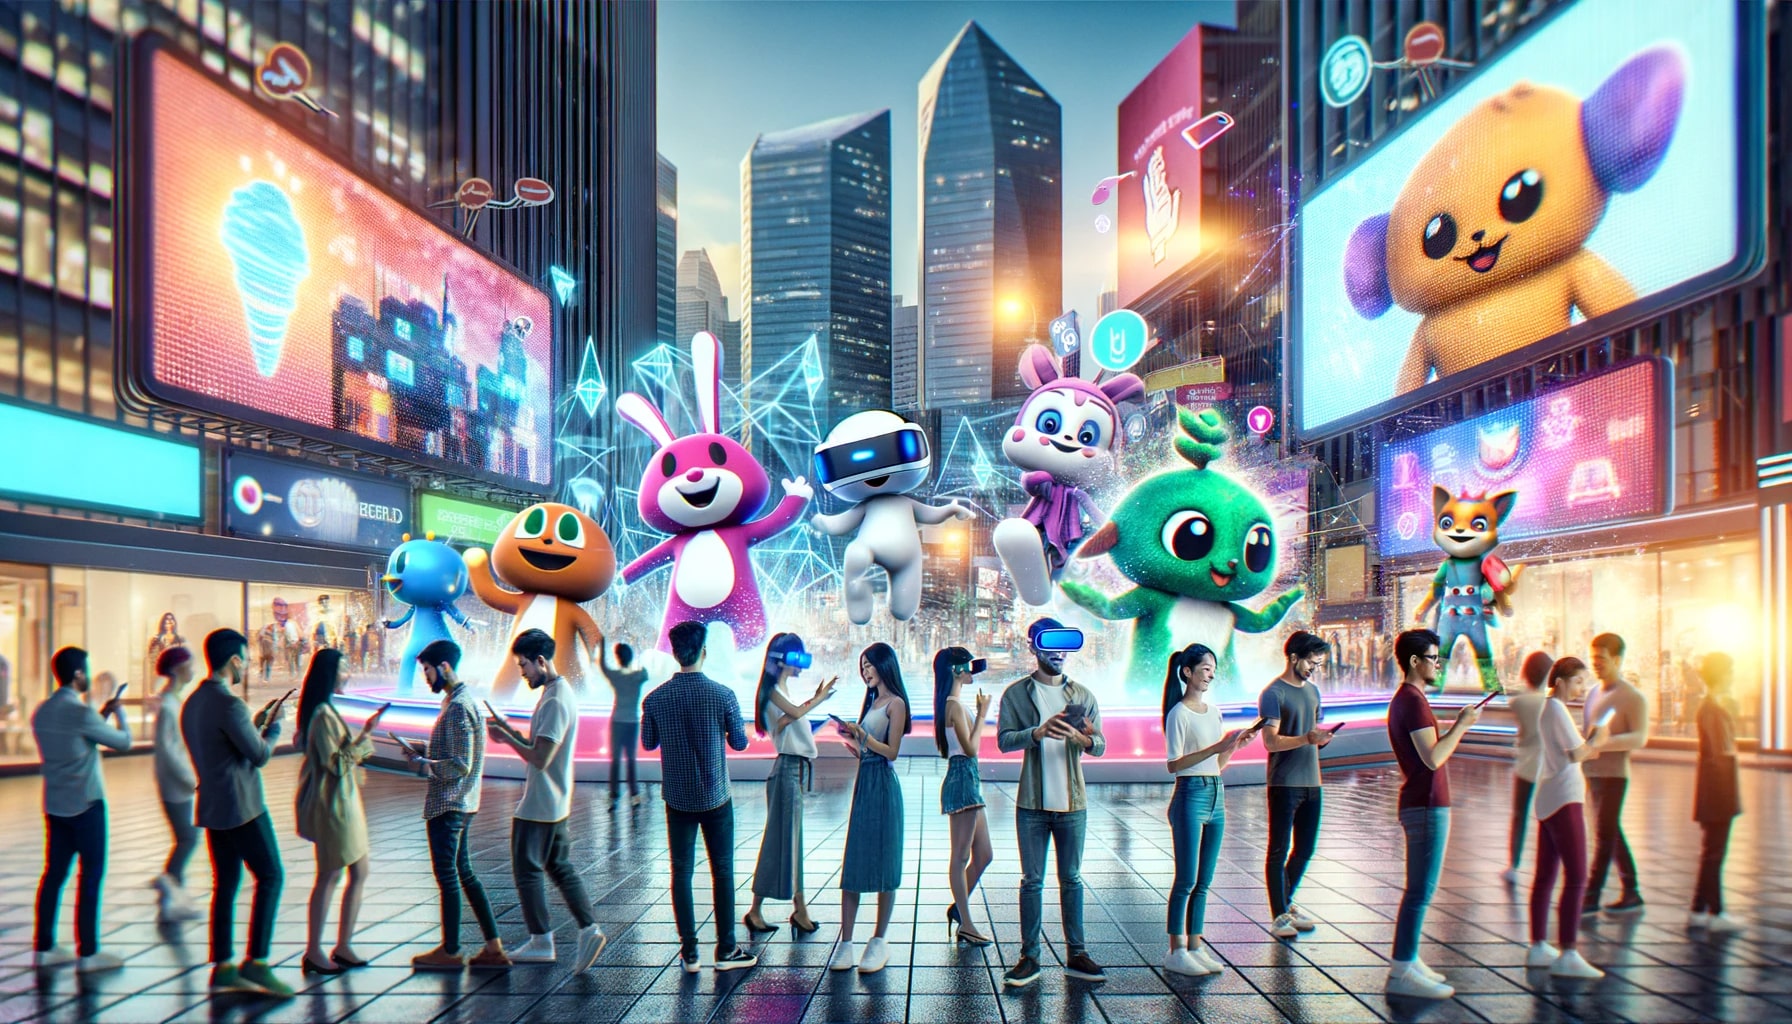 Leveraging AR & VR for Mascot Experiences